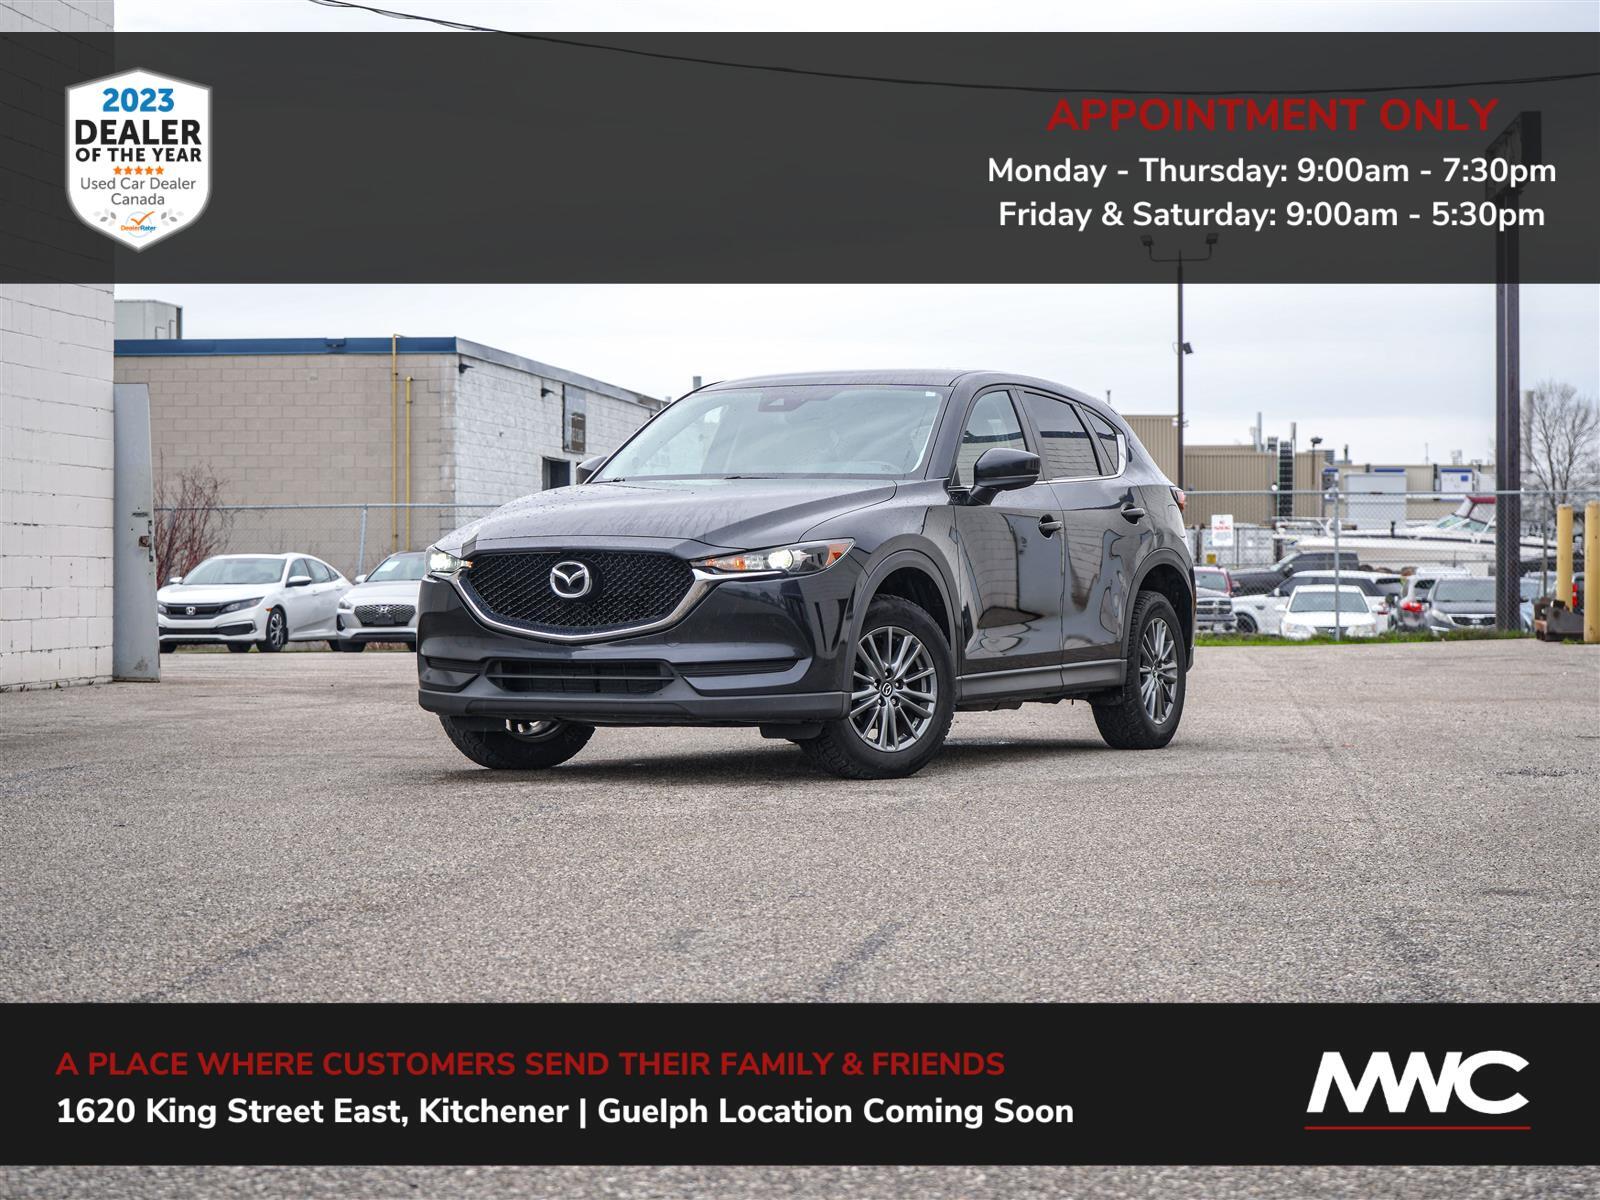 2018 Mazda CX-5 GX | AWD | IN GUELPH, BY APPT. ONLY